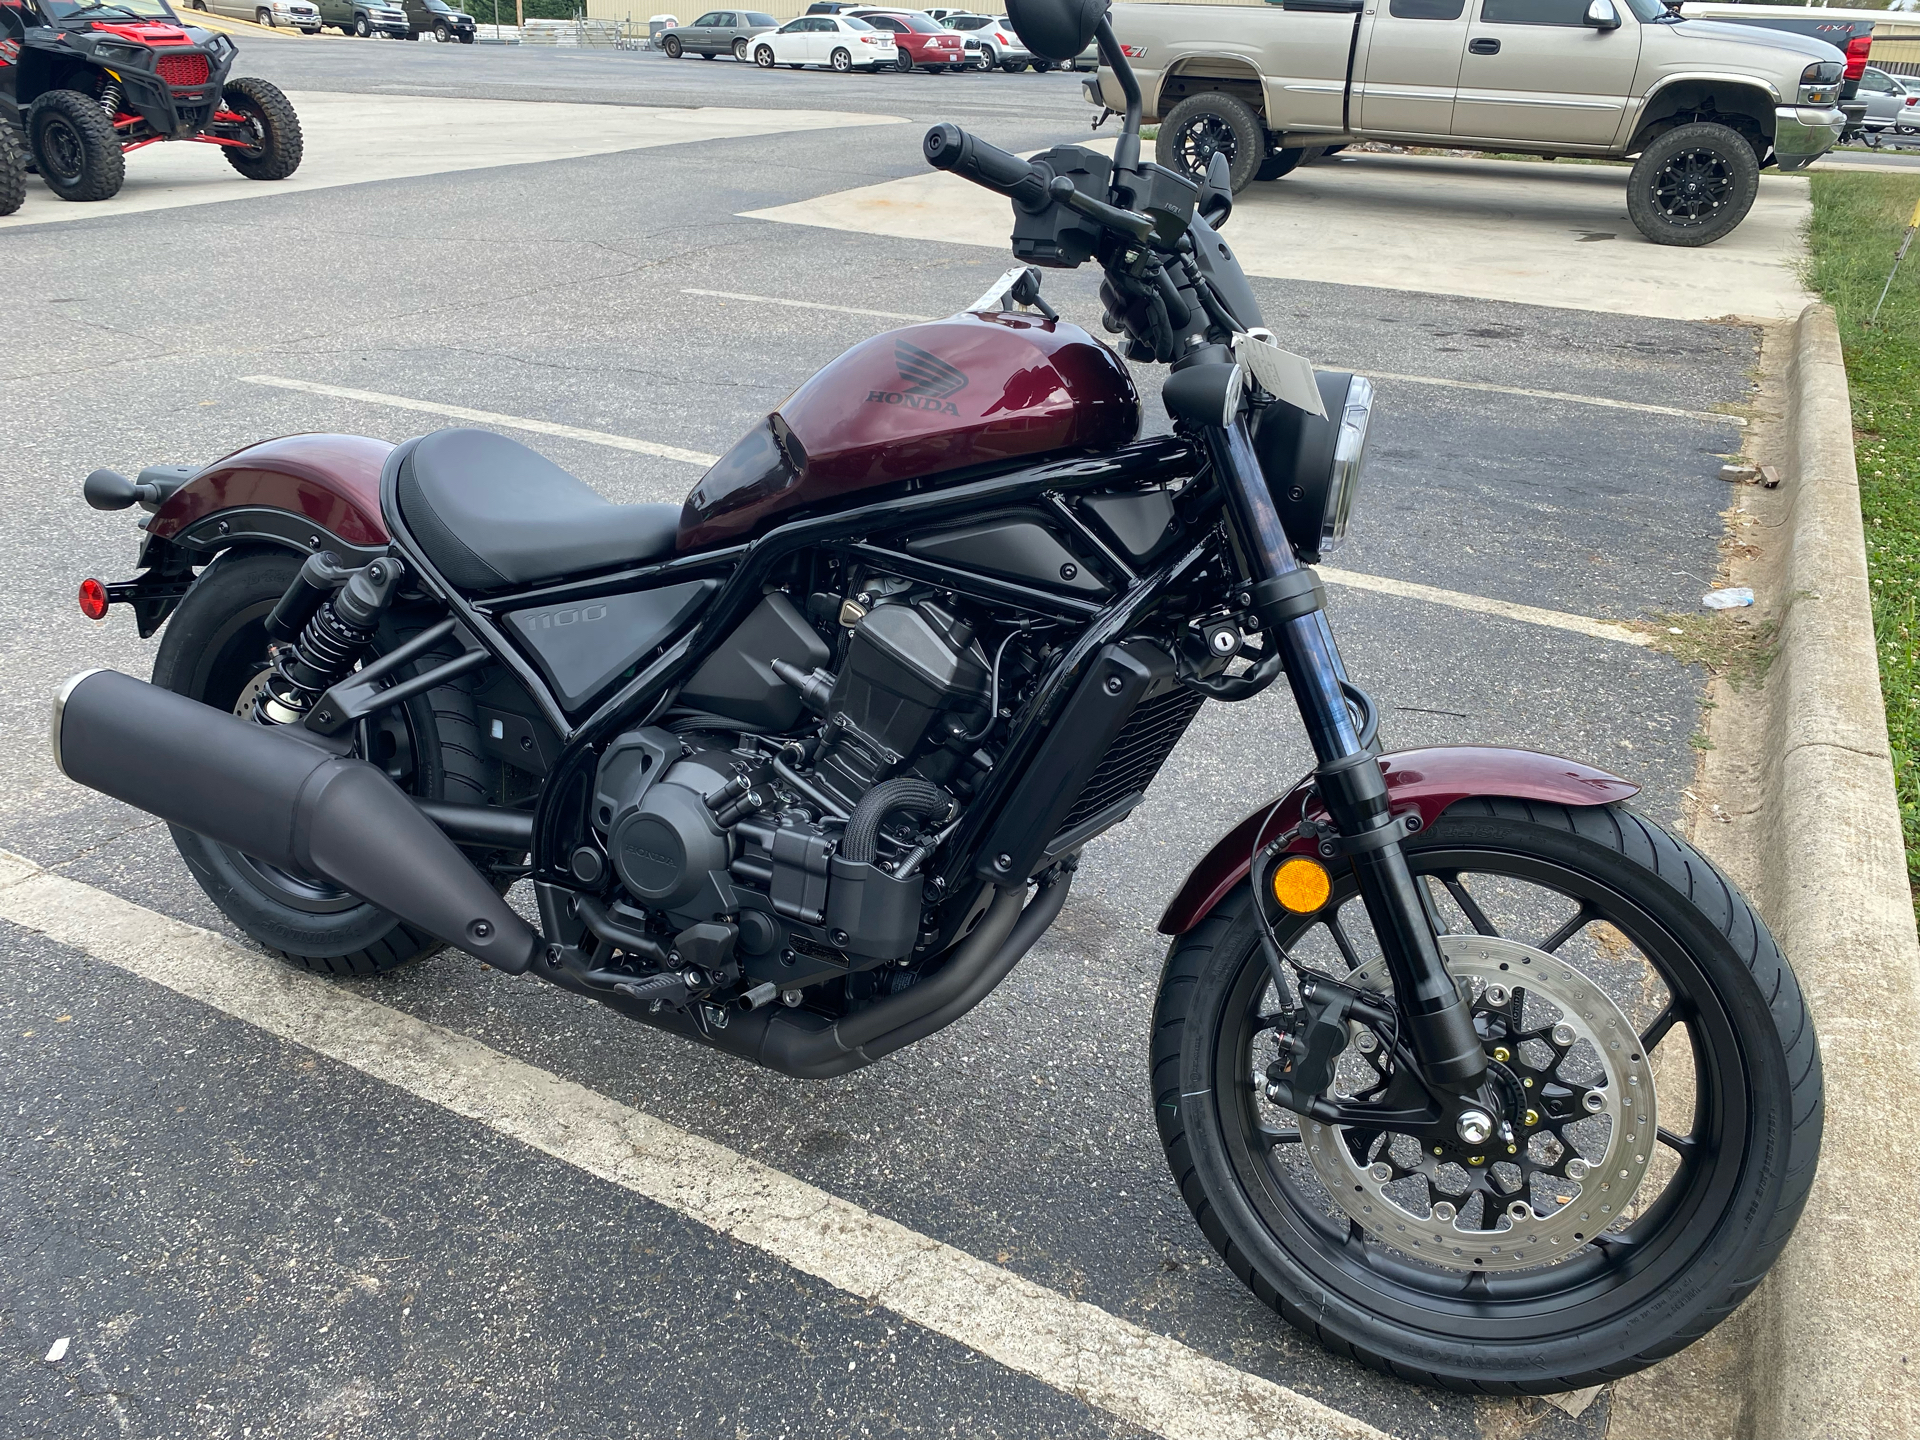 New 21 Honda Rebel 1100 Dct Motorcycles In Statesville Nc Stock Number K Greatwesternmotorcycles Com